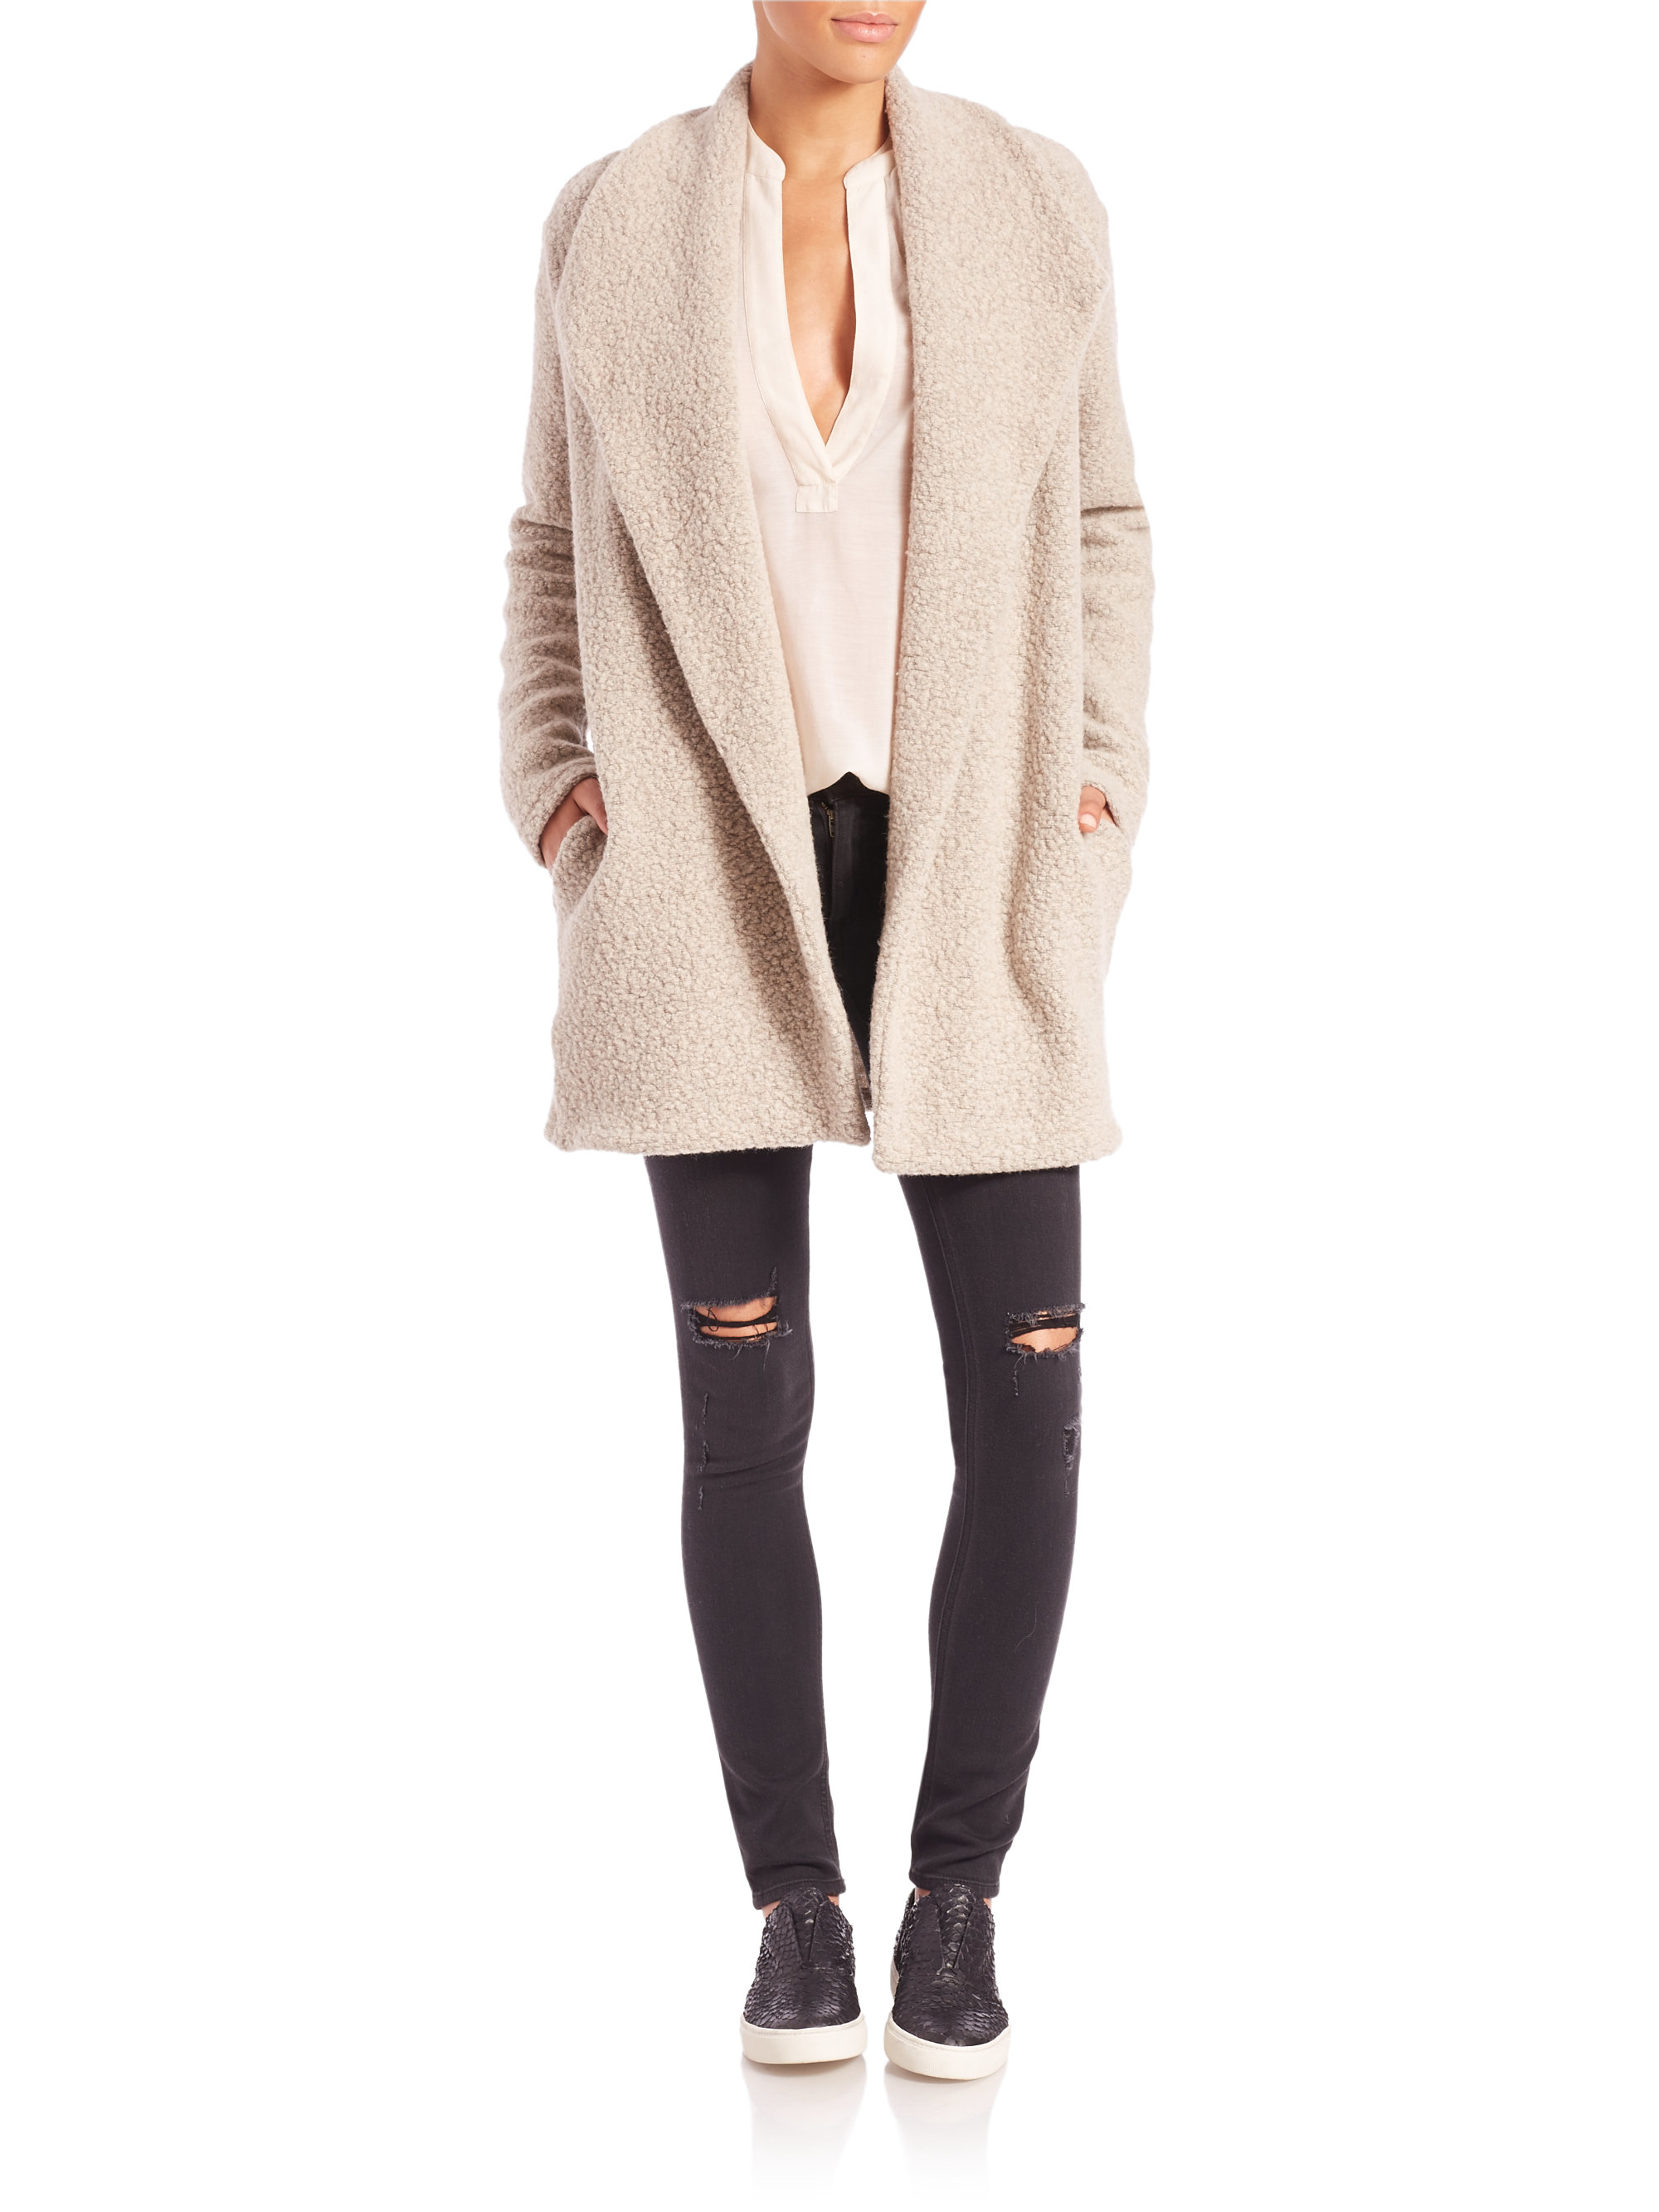 James perse Fleece Draped Open-front Cardigan in Natural | Lyst